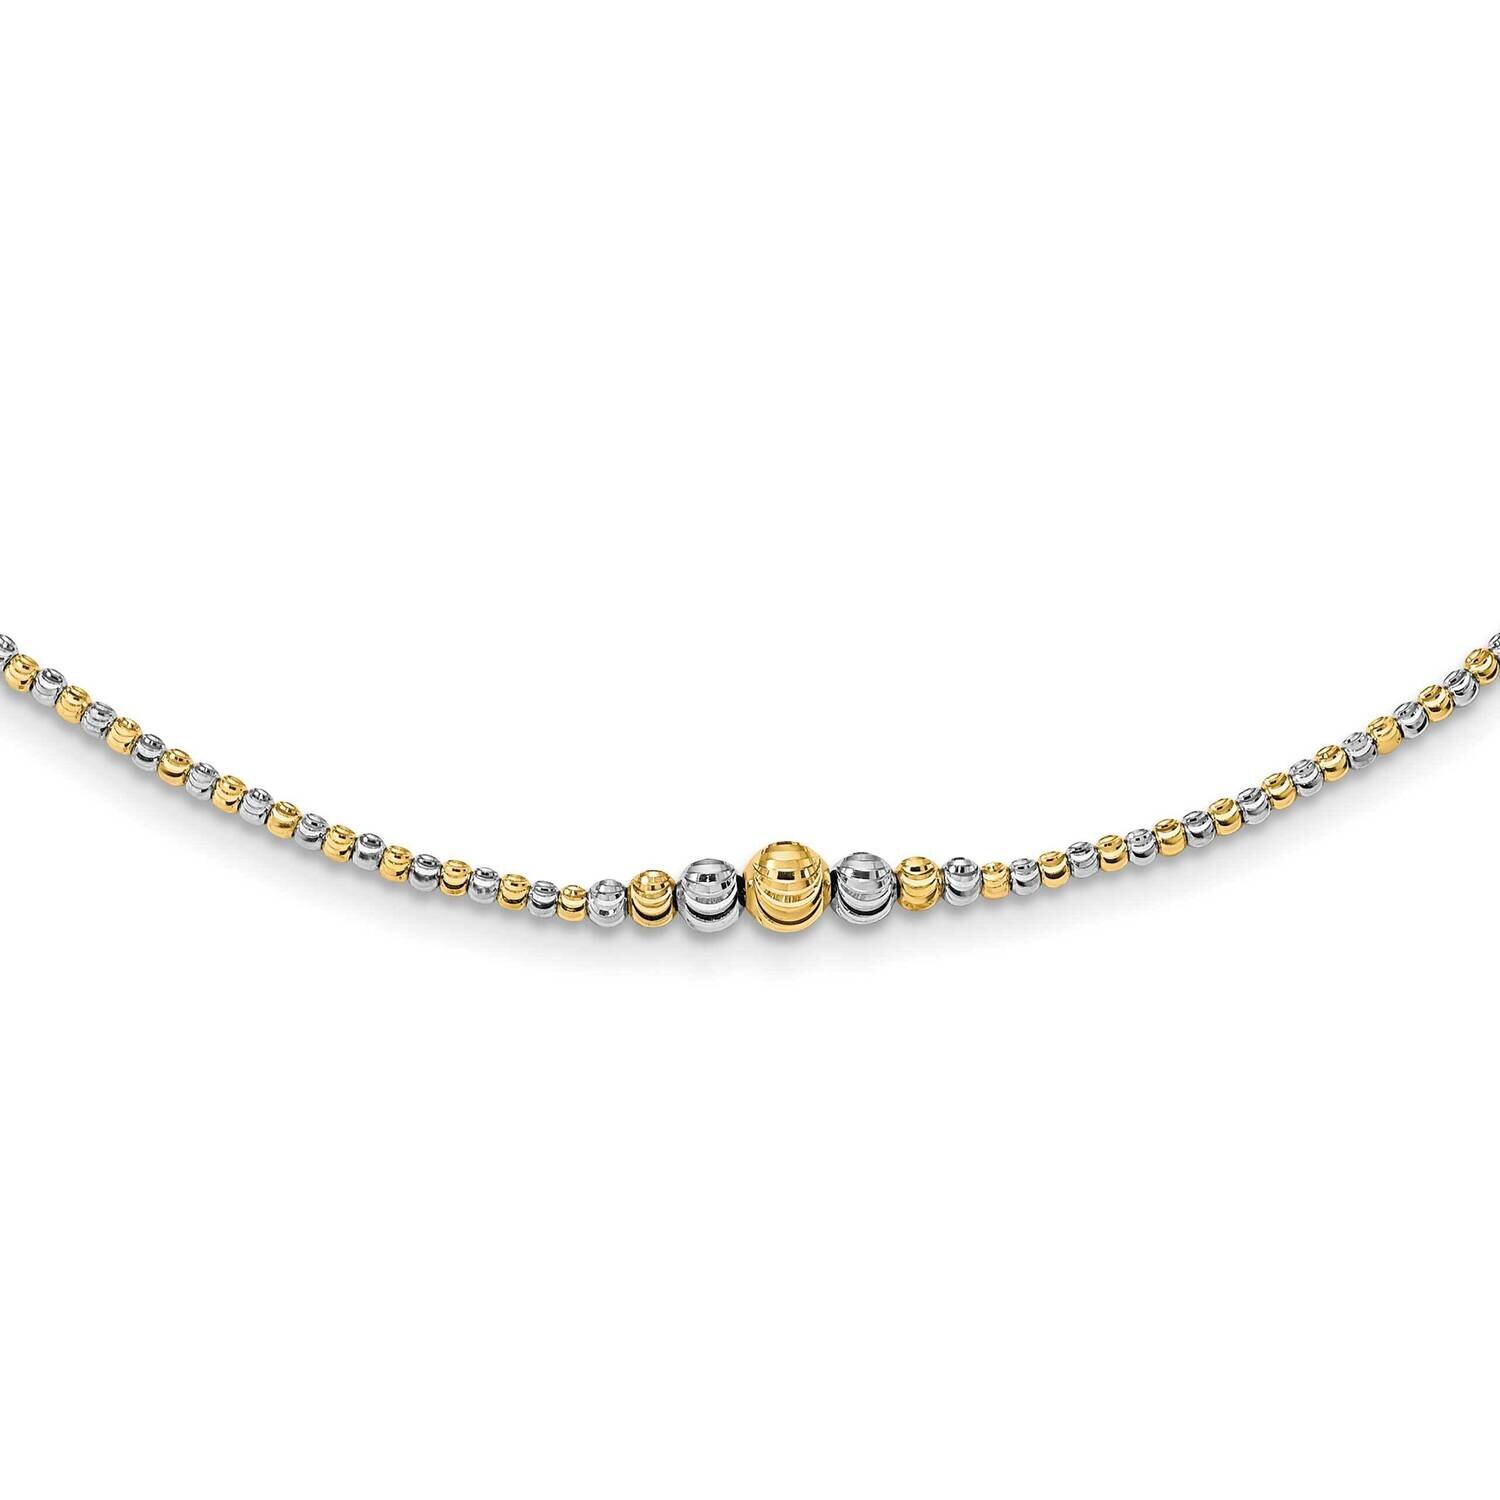 Diamond-Cut Beaded 17 Inch Necklace 14k Two-Tone Gold Polished SF2931-17